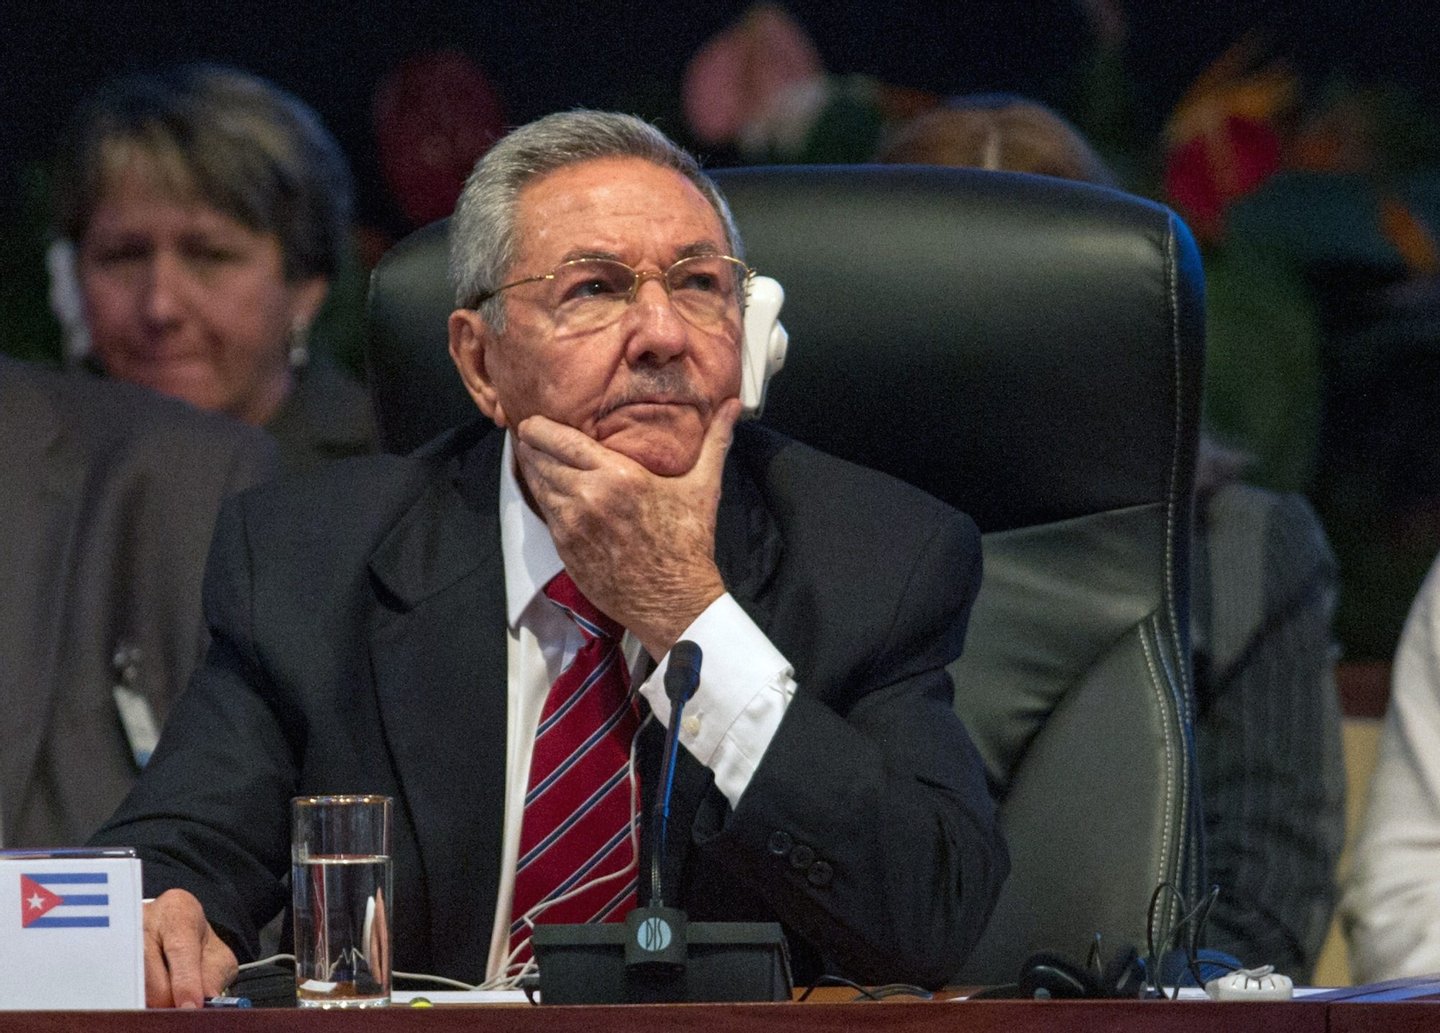 Cuban President Raul Castro listens during the opening of the Caribbean Community (CARICOM) Summit, in Havana, on December 8, 2014. The summit -- bringing together the 15 CARICOM member states and Cuba -- aims to increase trade and cooperation within the group and with Cuba. AFP PHOTO / YAMIL LAGE (Photo credit should read YAMIL LAGE/AFP/Getty Images)